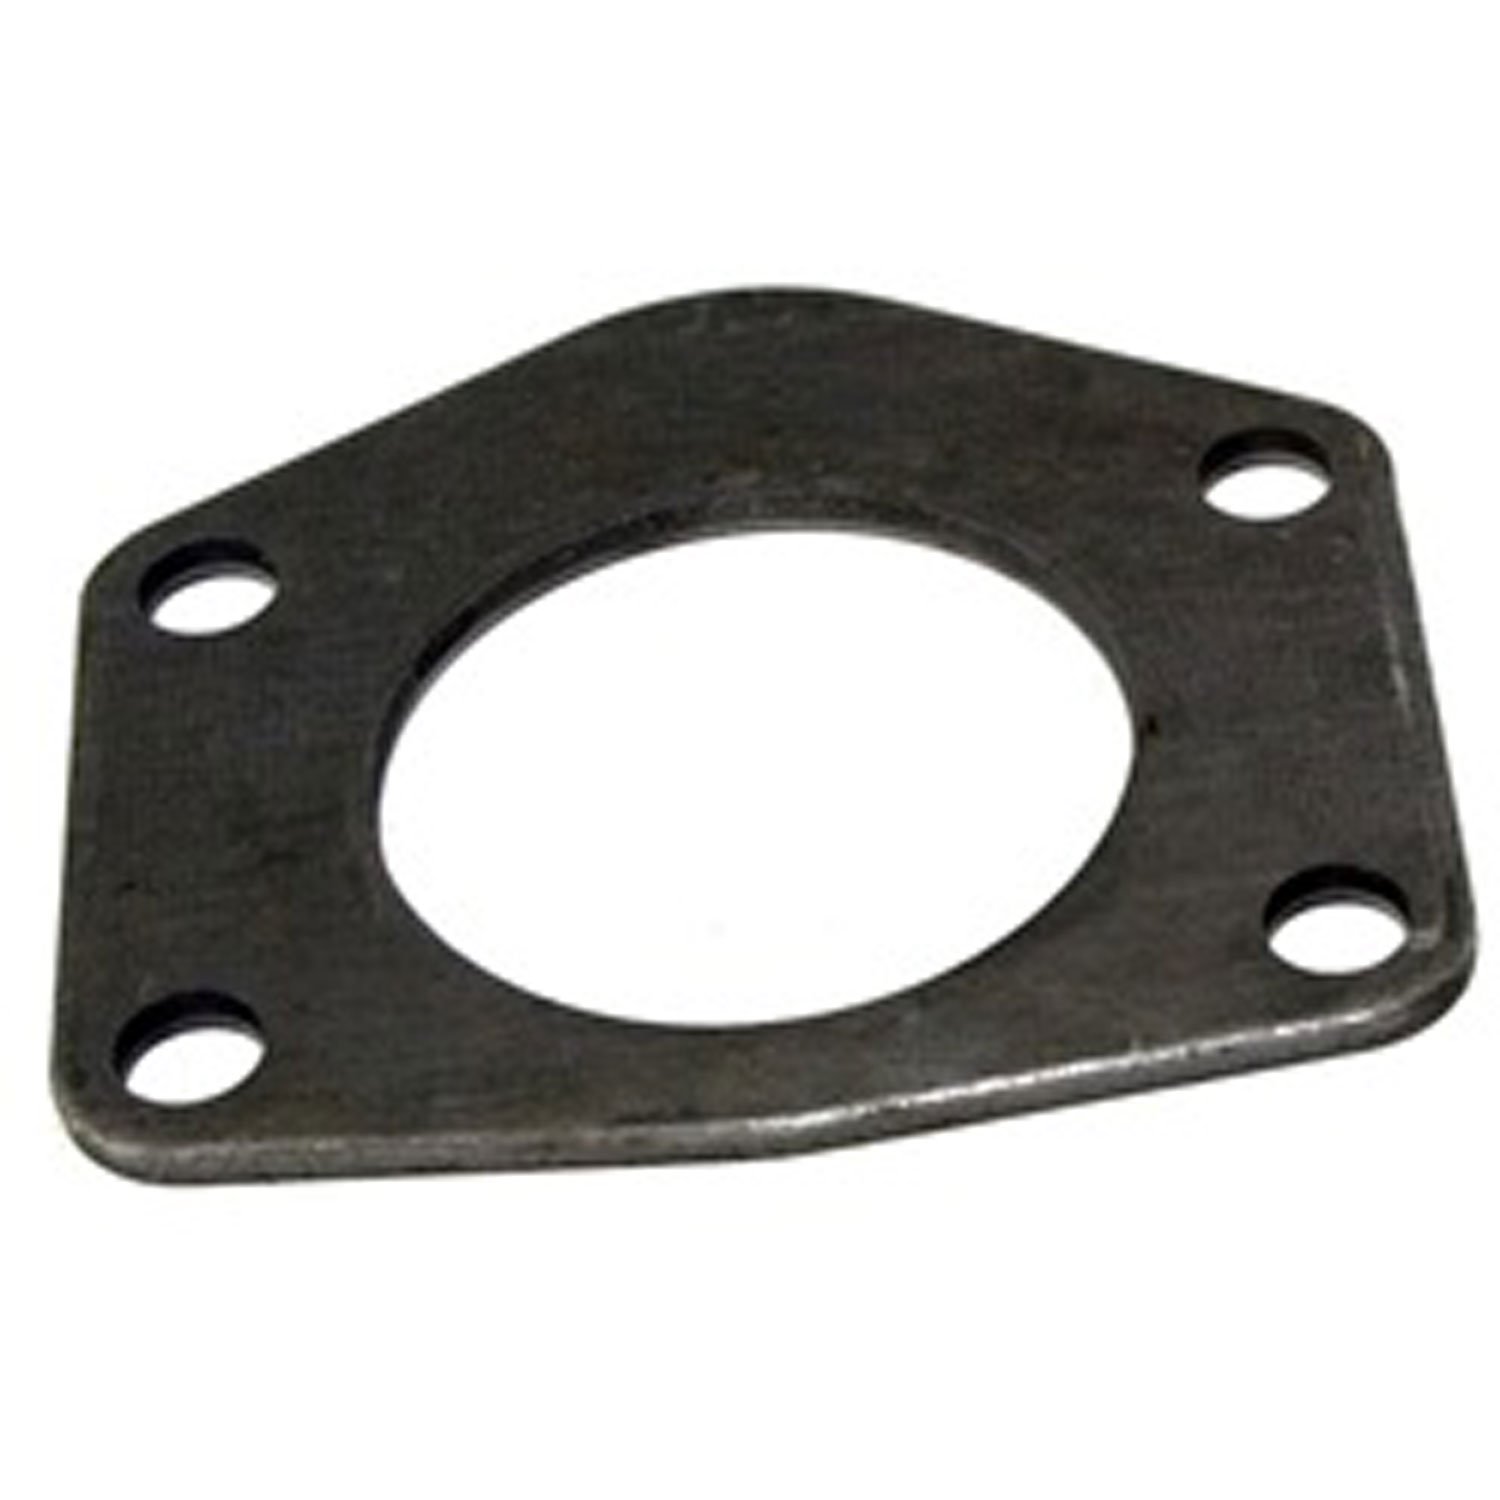 Axle Retainer for Dana 35 1984-1989 Jeep Wrangler YJ By Omix-ADA